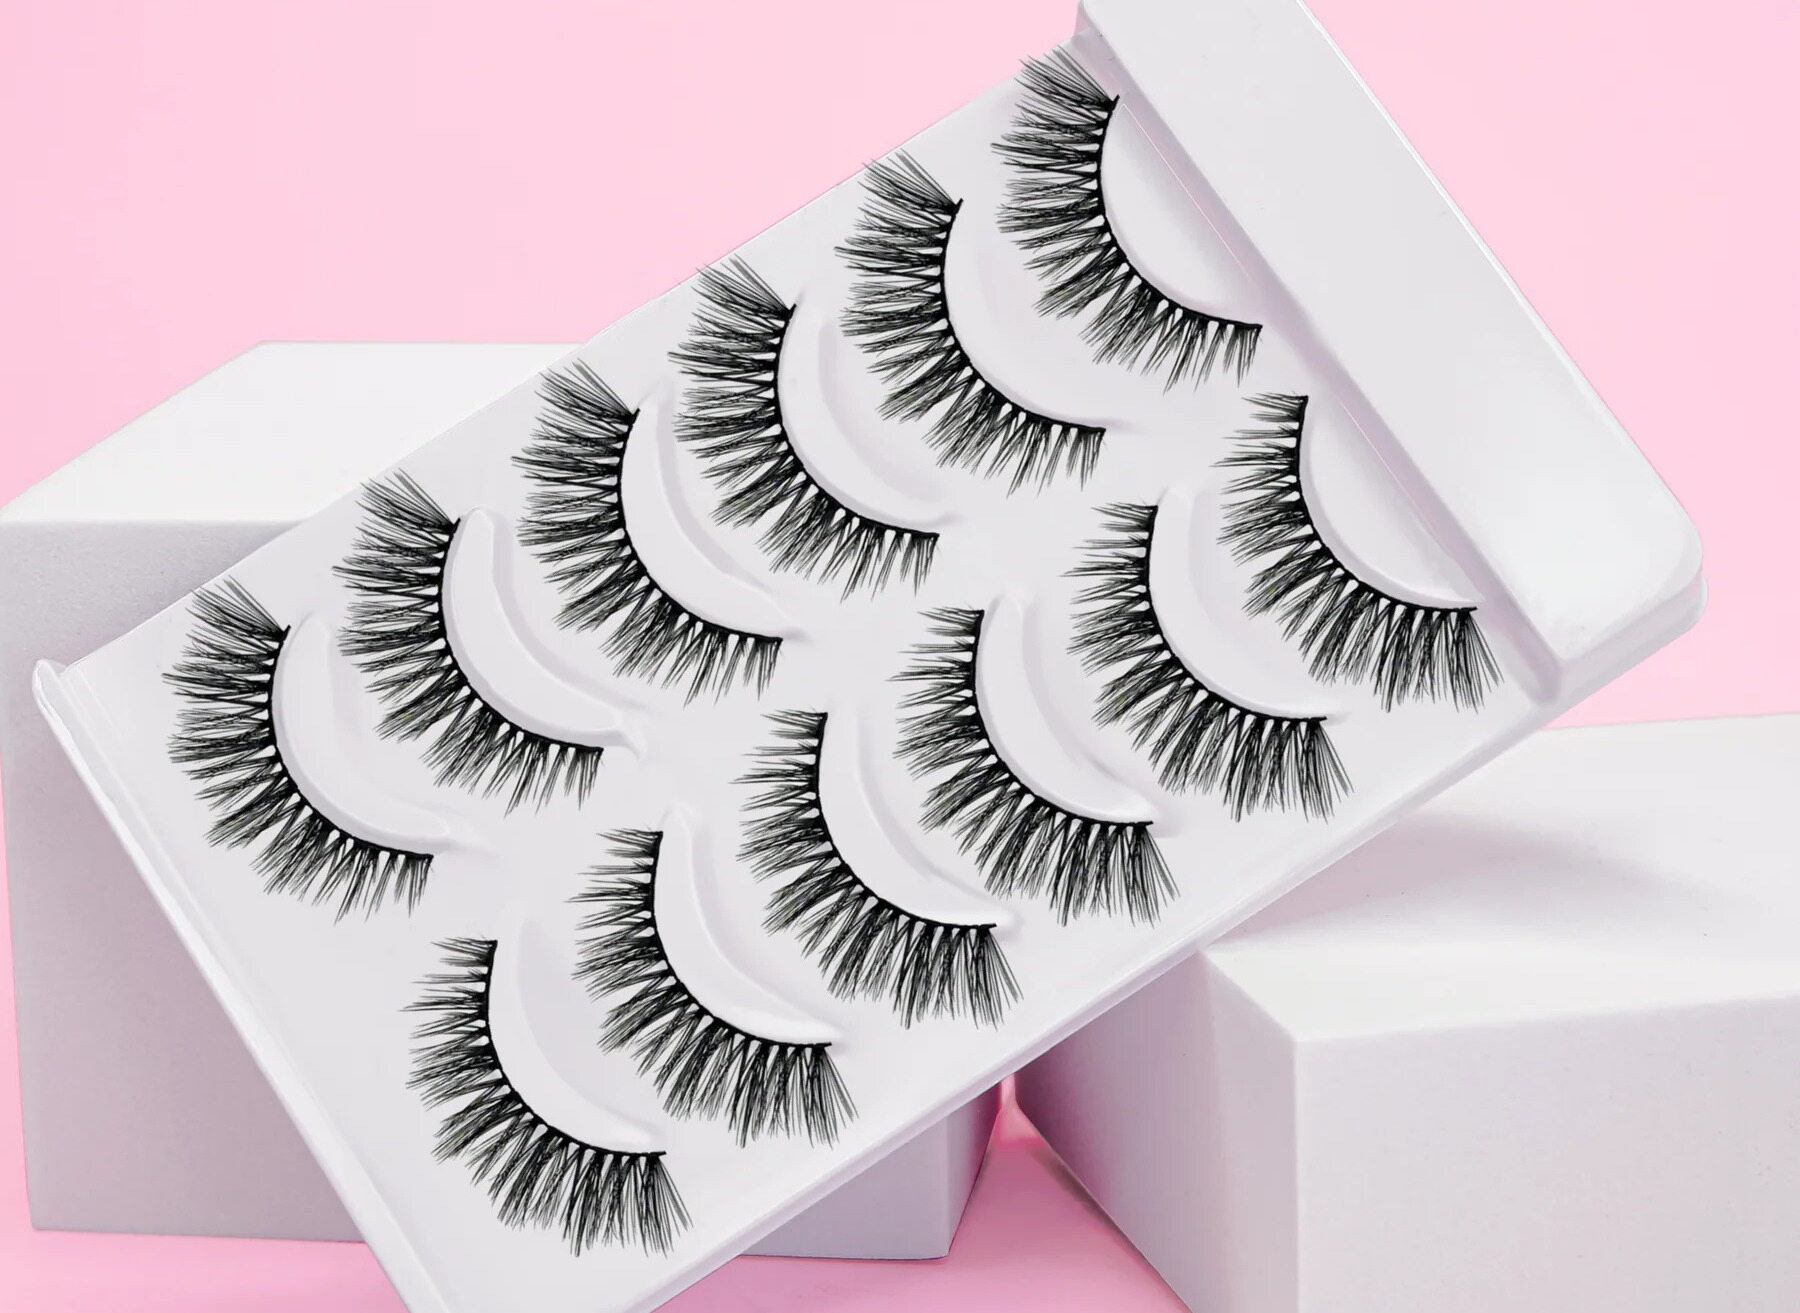 How To Store Lashes